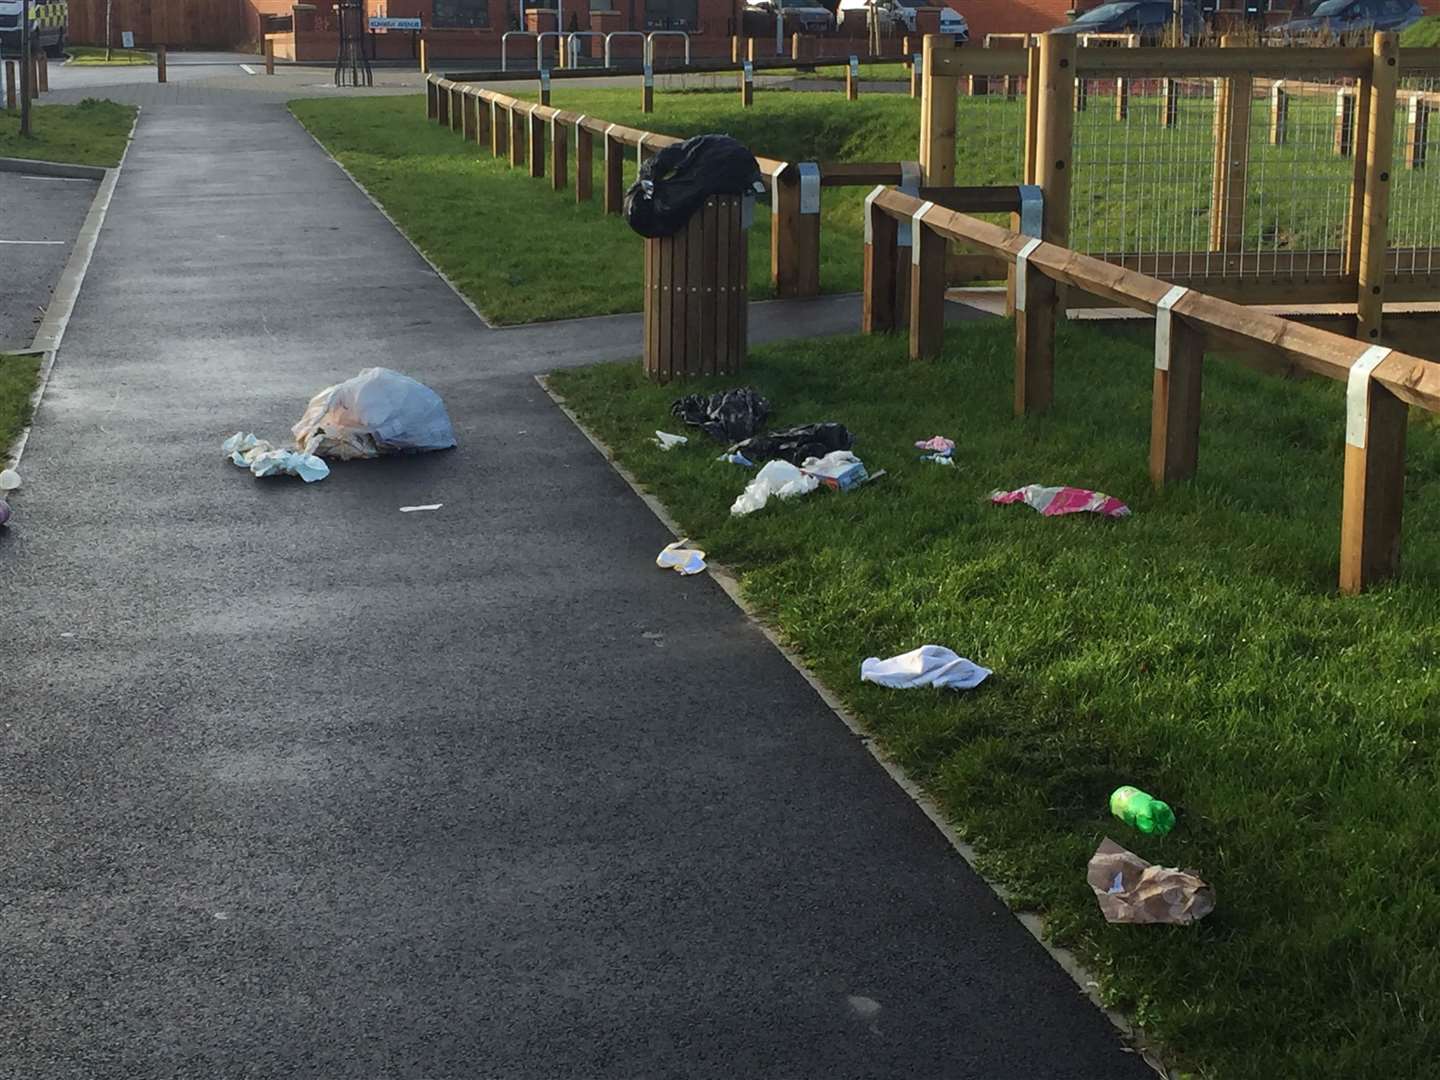 Rubbish could be seen strewn around the estate with bins overflowing